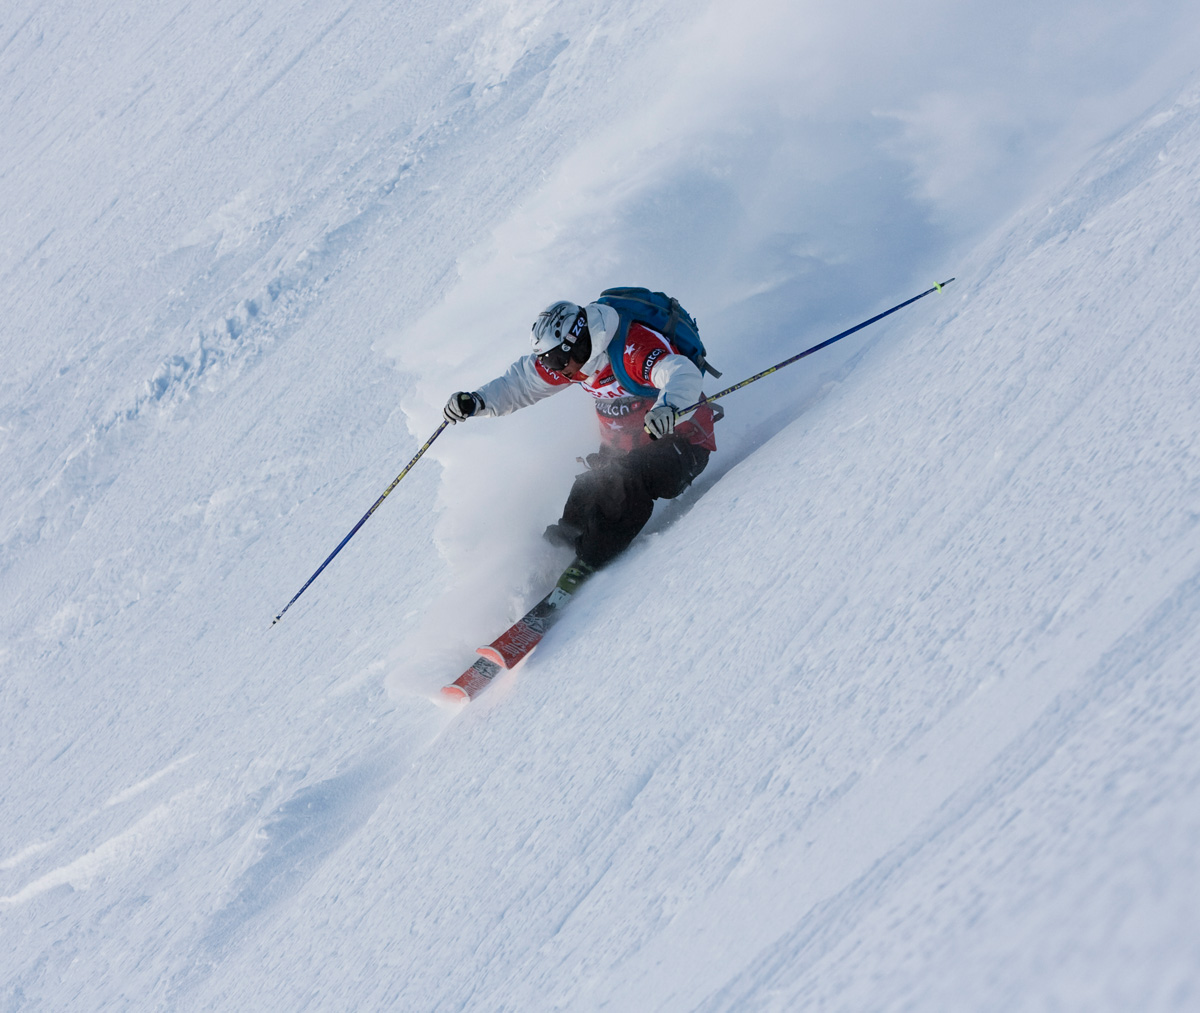 RIDER: LUDO LOVEY - FRA
©NISSAN XTREME BY SWATCH - VERBIER 2010 
Photographer:  J. HADIK